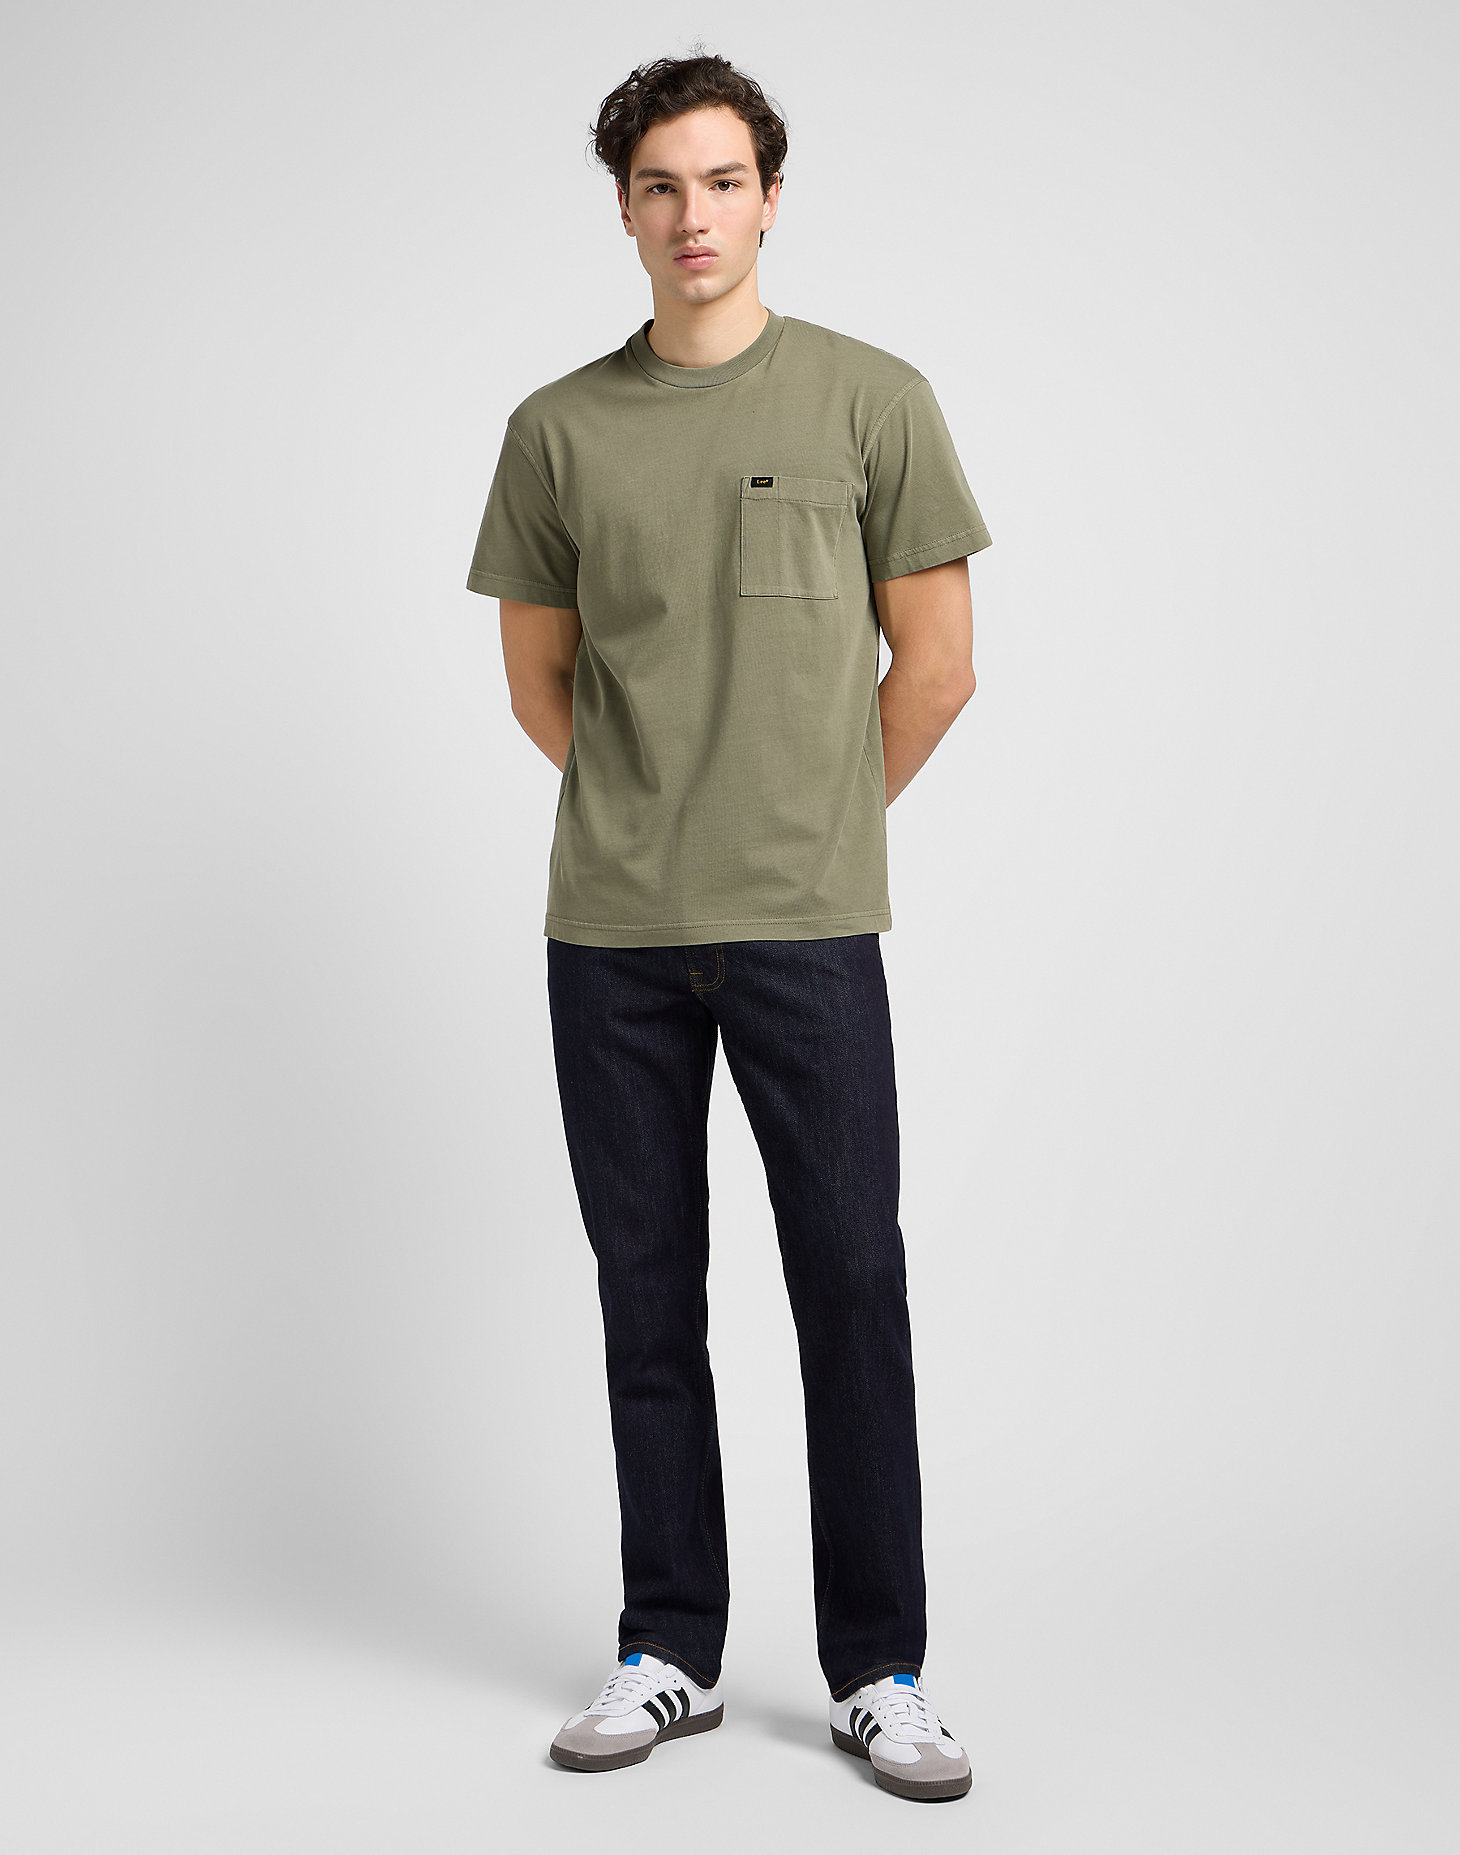 Relaxed Pocket Tee in Olive Grove alternative view 2